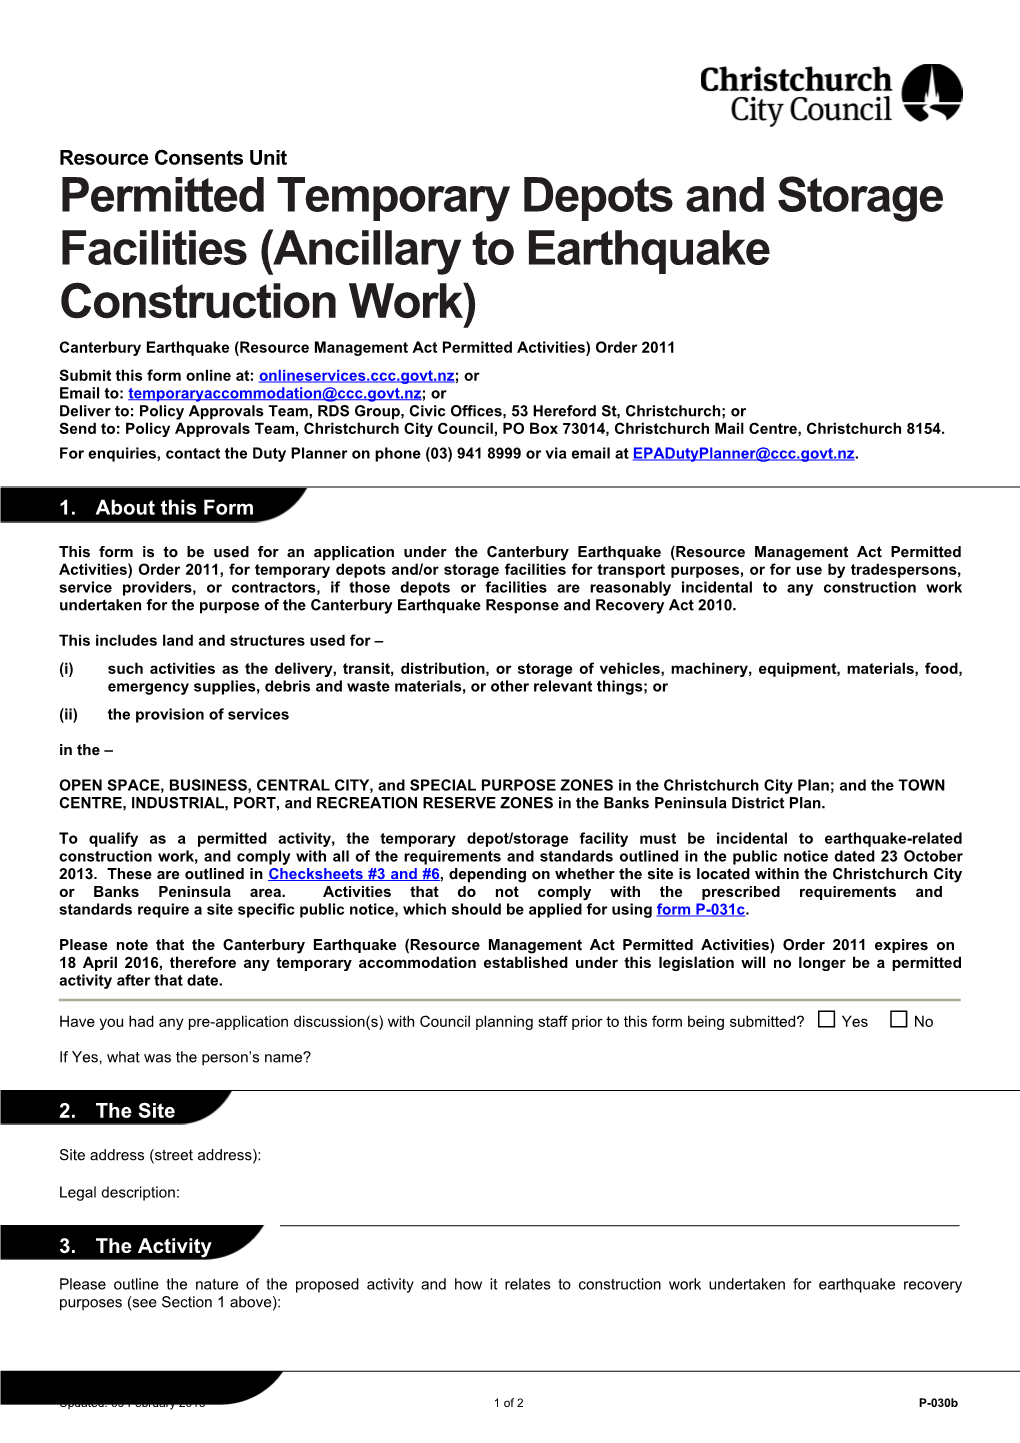 P-030B - Permitted Temporary Depots & Storage Facilities (Ancillary to Earthquake Construction